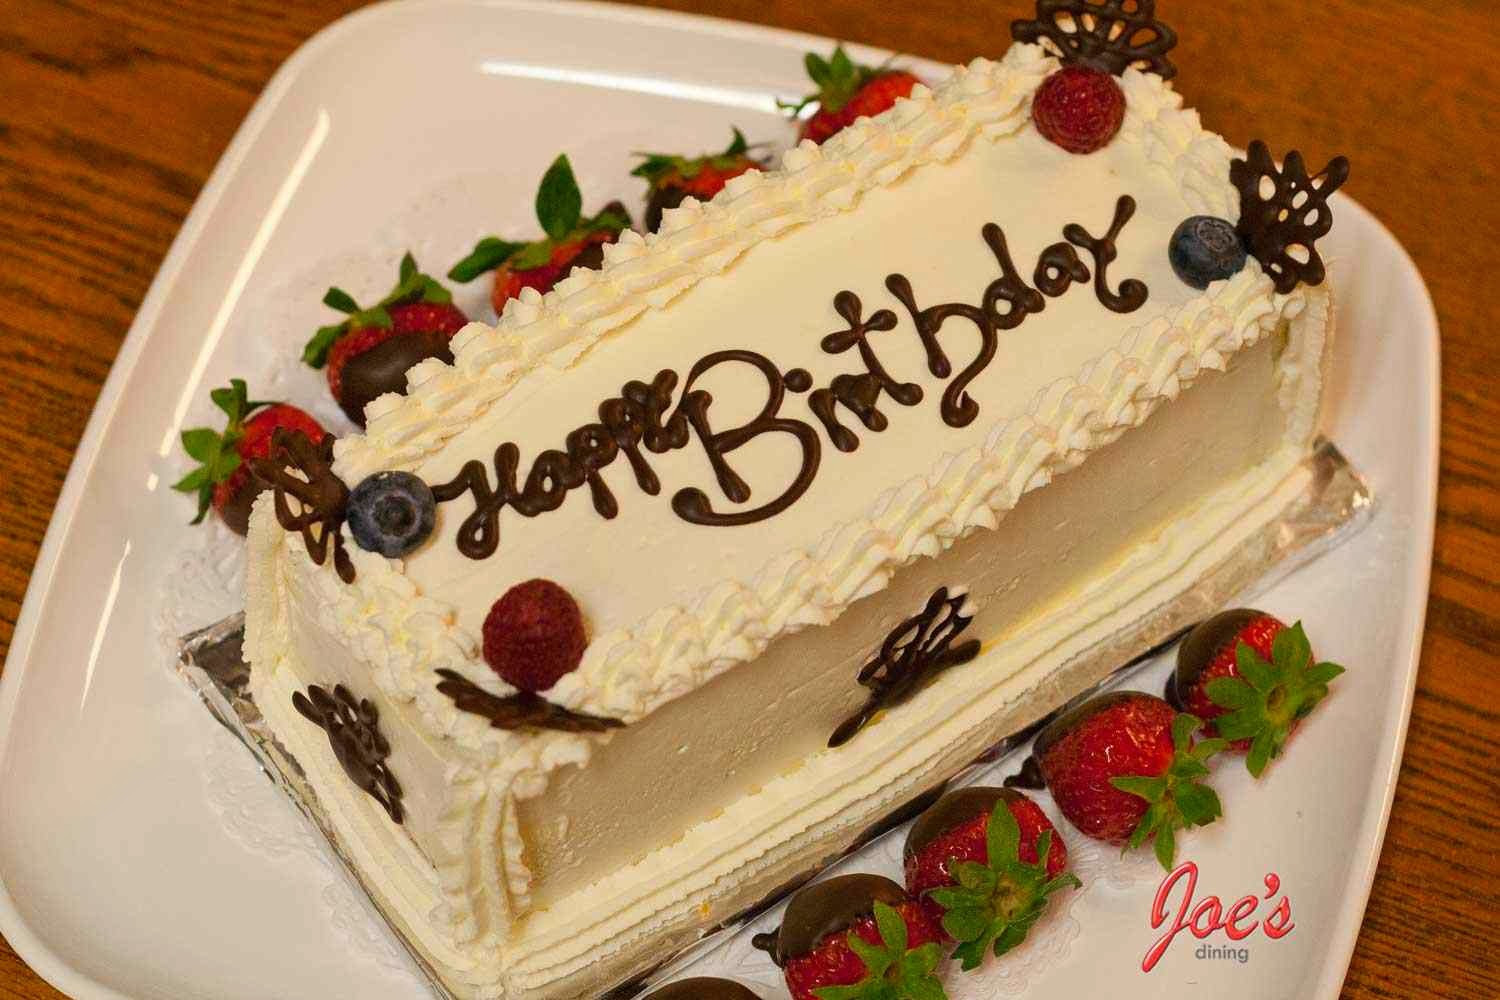 Happy Birthday Cake Images Free Download
 Lovable Happy Birthday Greetings free